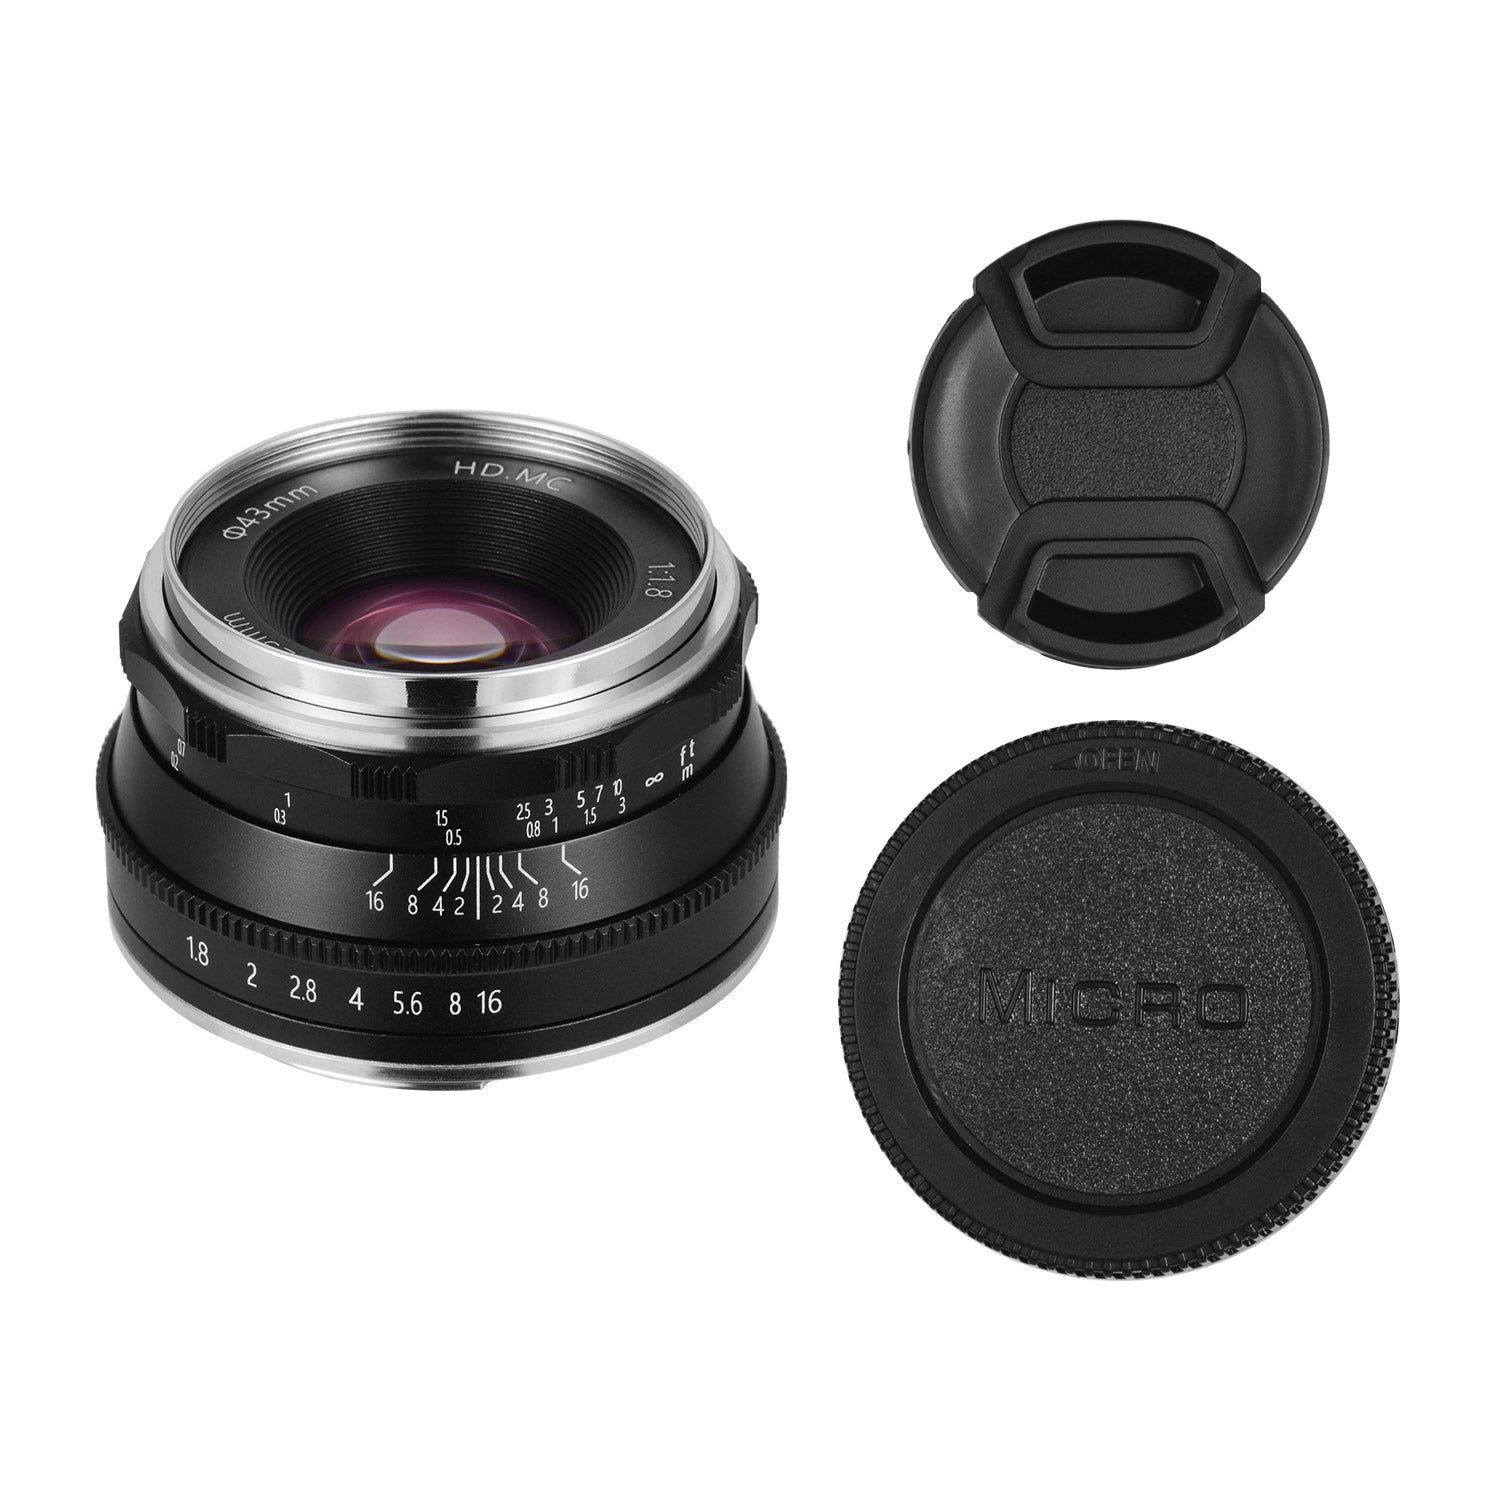 Camdiox 25mm f/1.8 manual lens for APS-C mirrorless camera - Canon EOS M Fujifilm Sony Olympus OM-D silver color